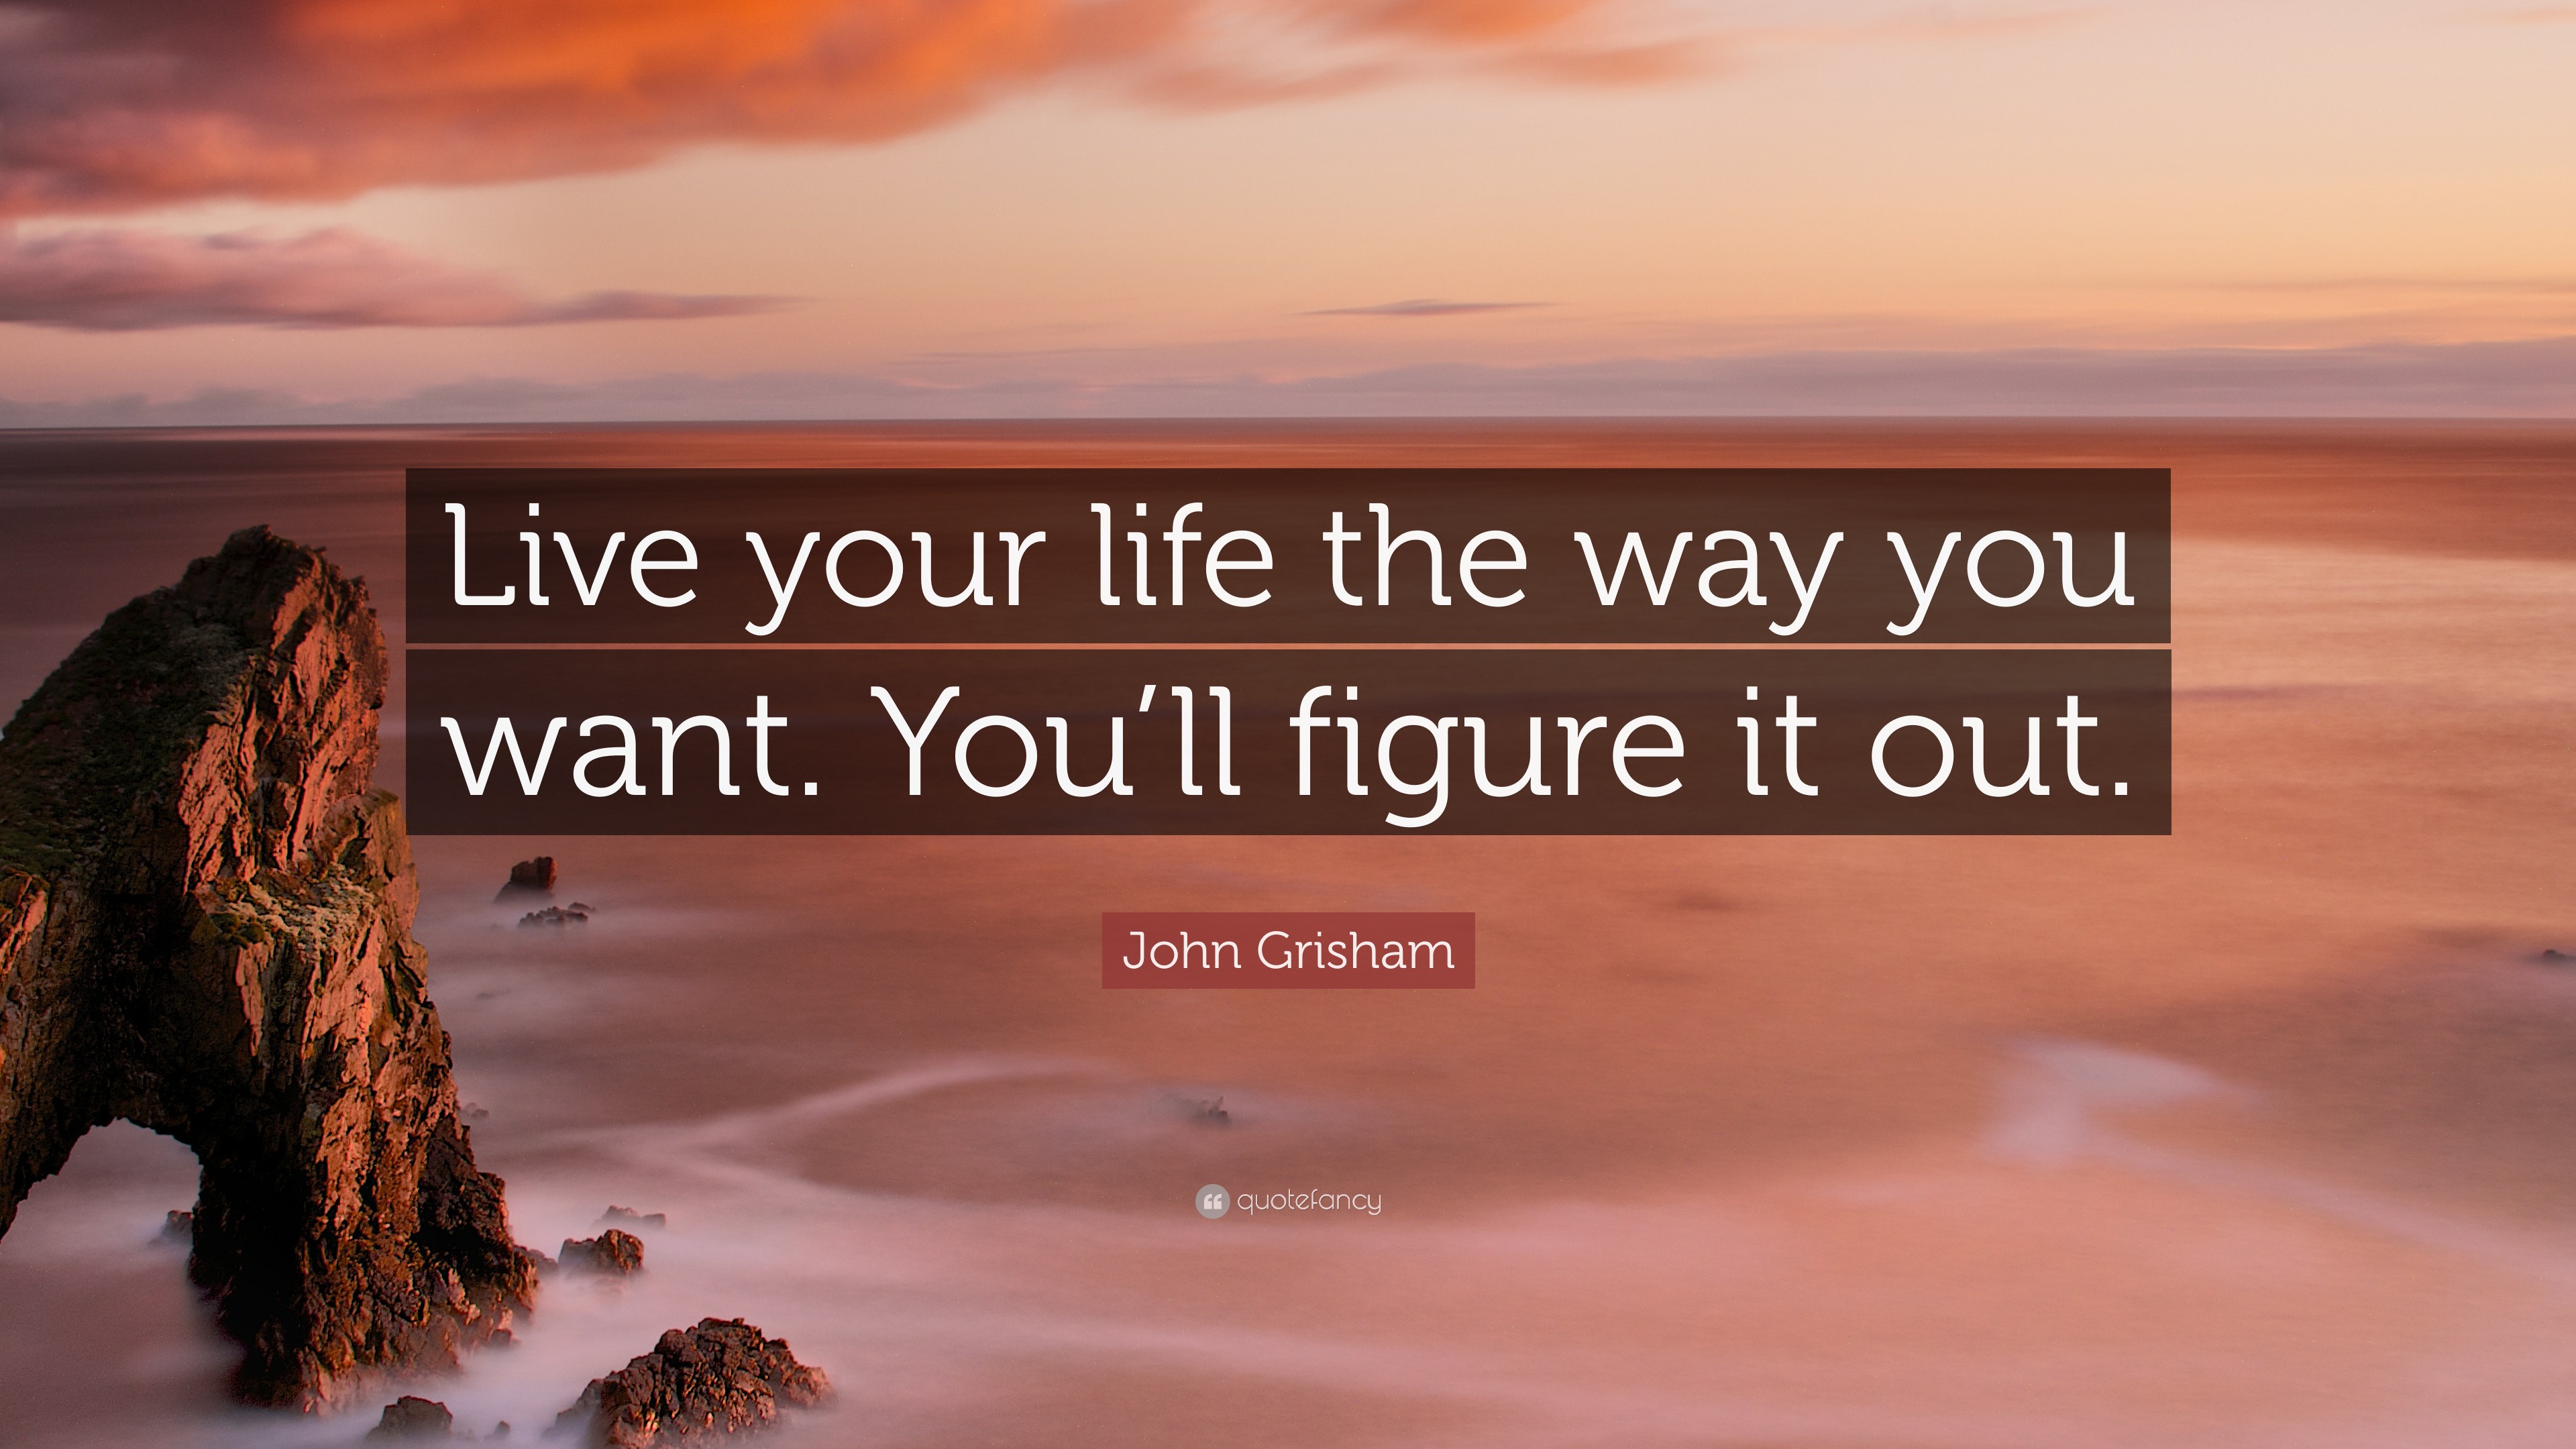 John Grisham Quote: “Live your life the way you want. You’ll figure it